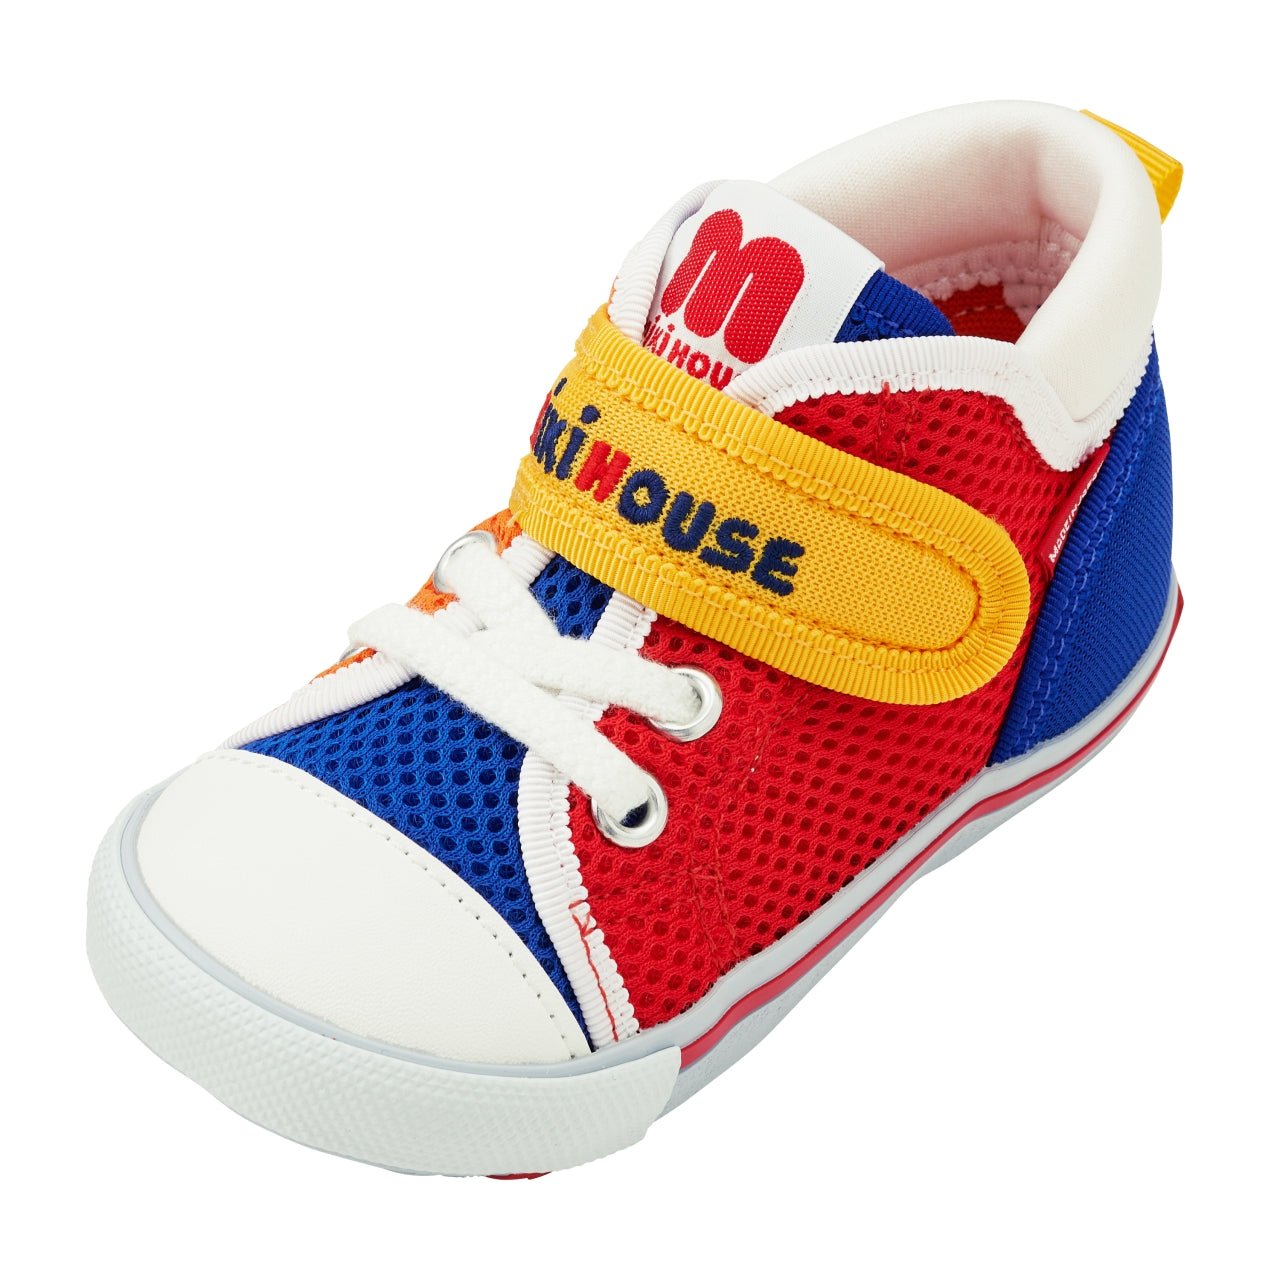 Double Russell Mesh Second Shoes - Blast from the Past - MIKI HOUSE USA